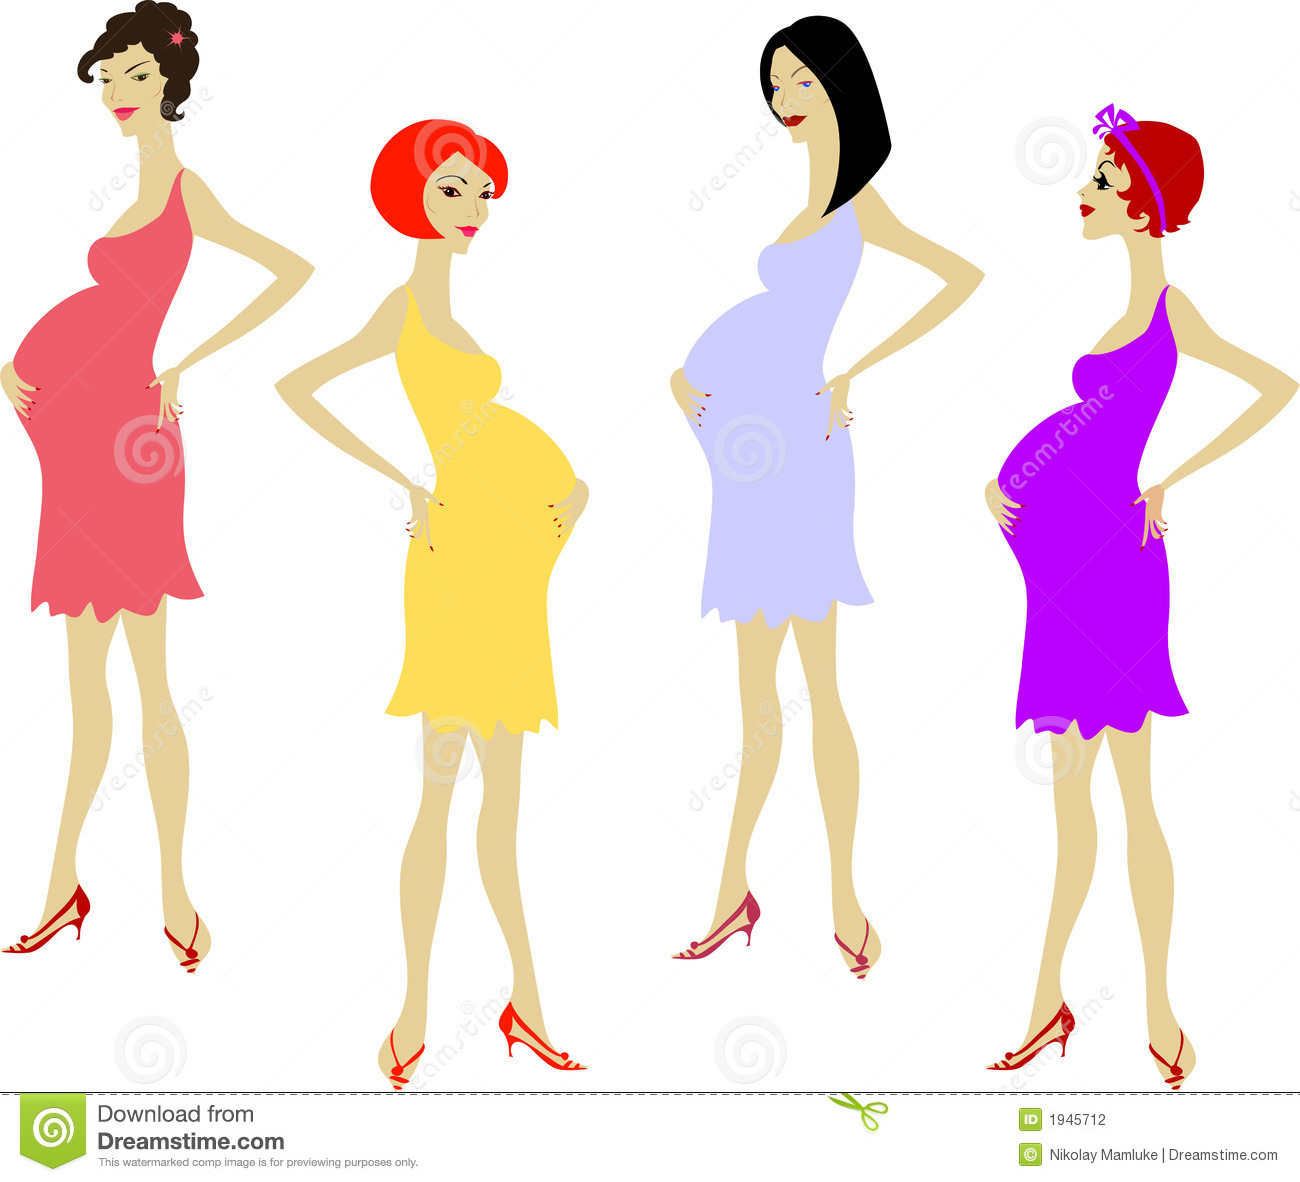 Distinct And Different Variations Of A Pregnant Lady Illustration